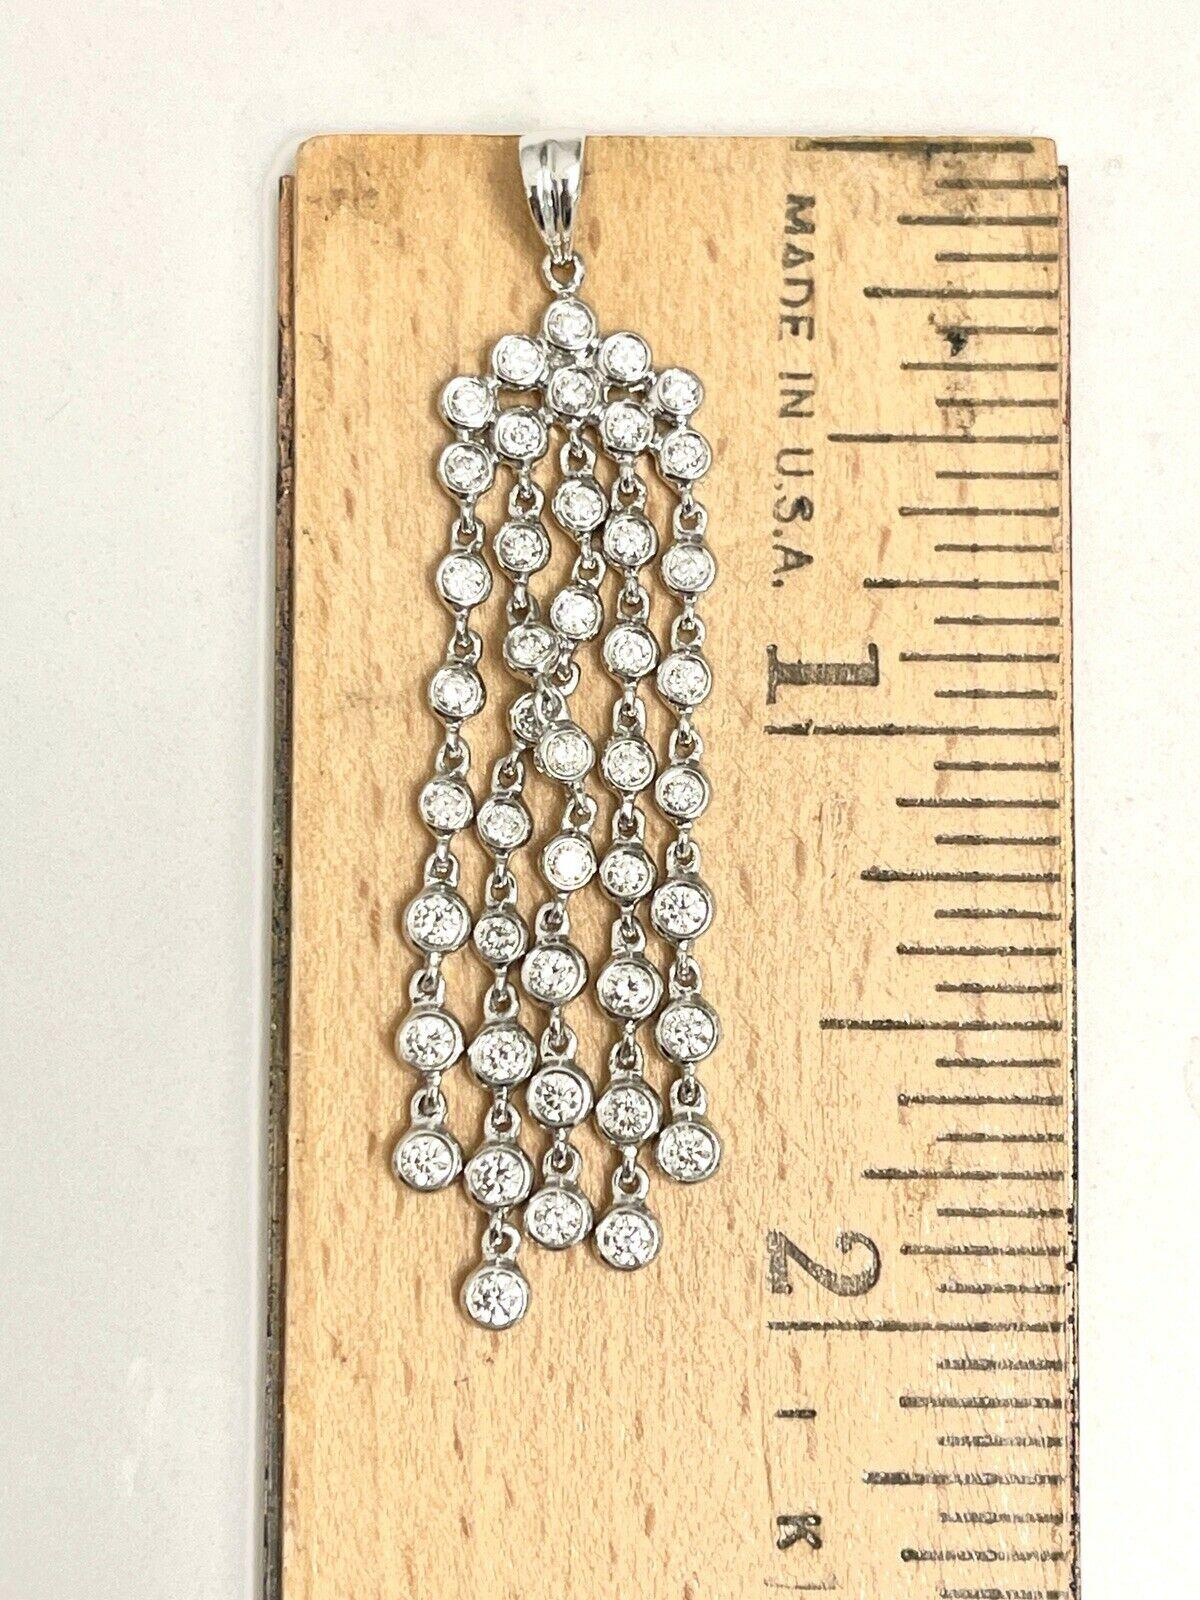  Specifications:
    MAIN stone: ROUND DIAMOND
    DIAMOND: 45 PIECES 
    CARAT TOTAL WEIGHT: approx 1.14 CTW
    COLOR/clarity: G/SI
    brand: UNBRANDED
    metal: 18K WHITE GOLD
    type: PENDANT
    weight: 4.70 GRS 
    LENGTH: NO CHAIN
   